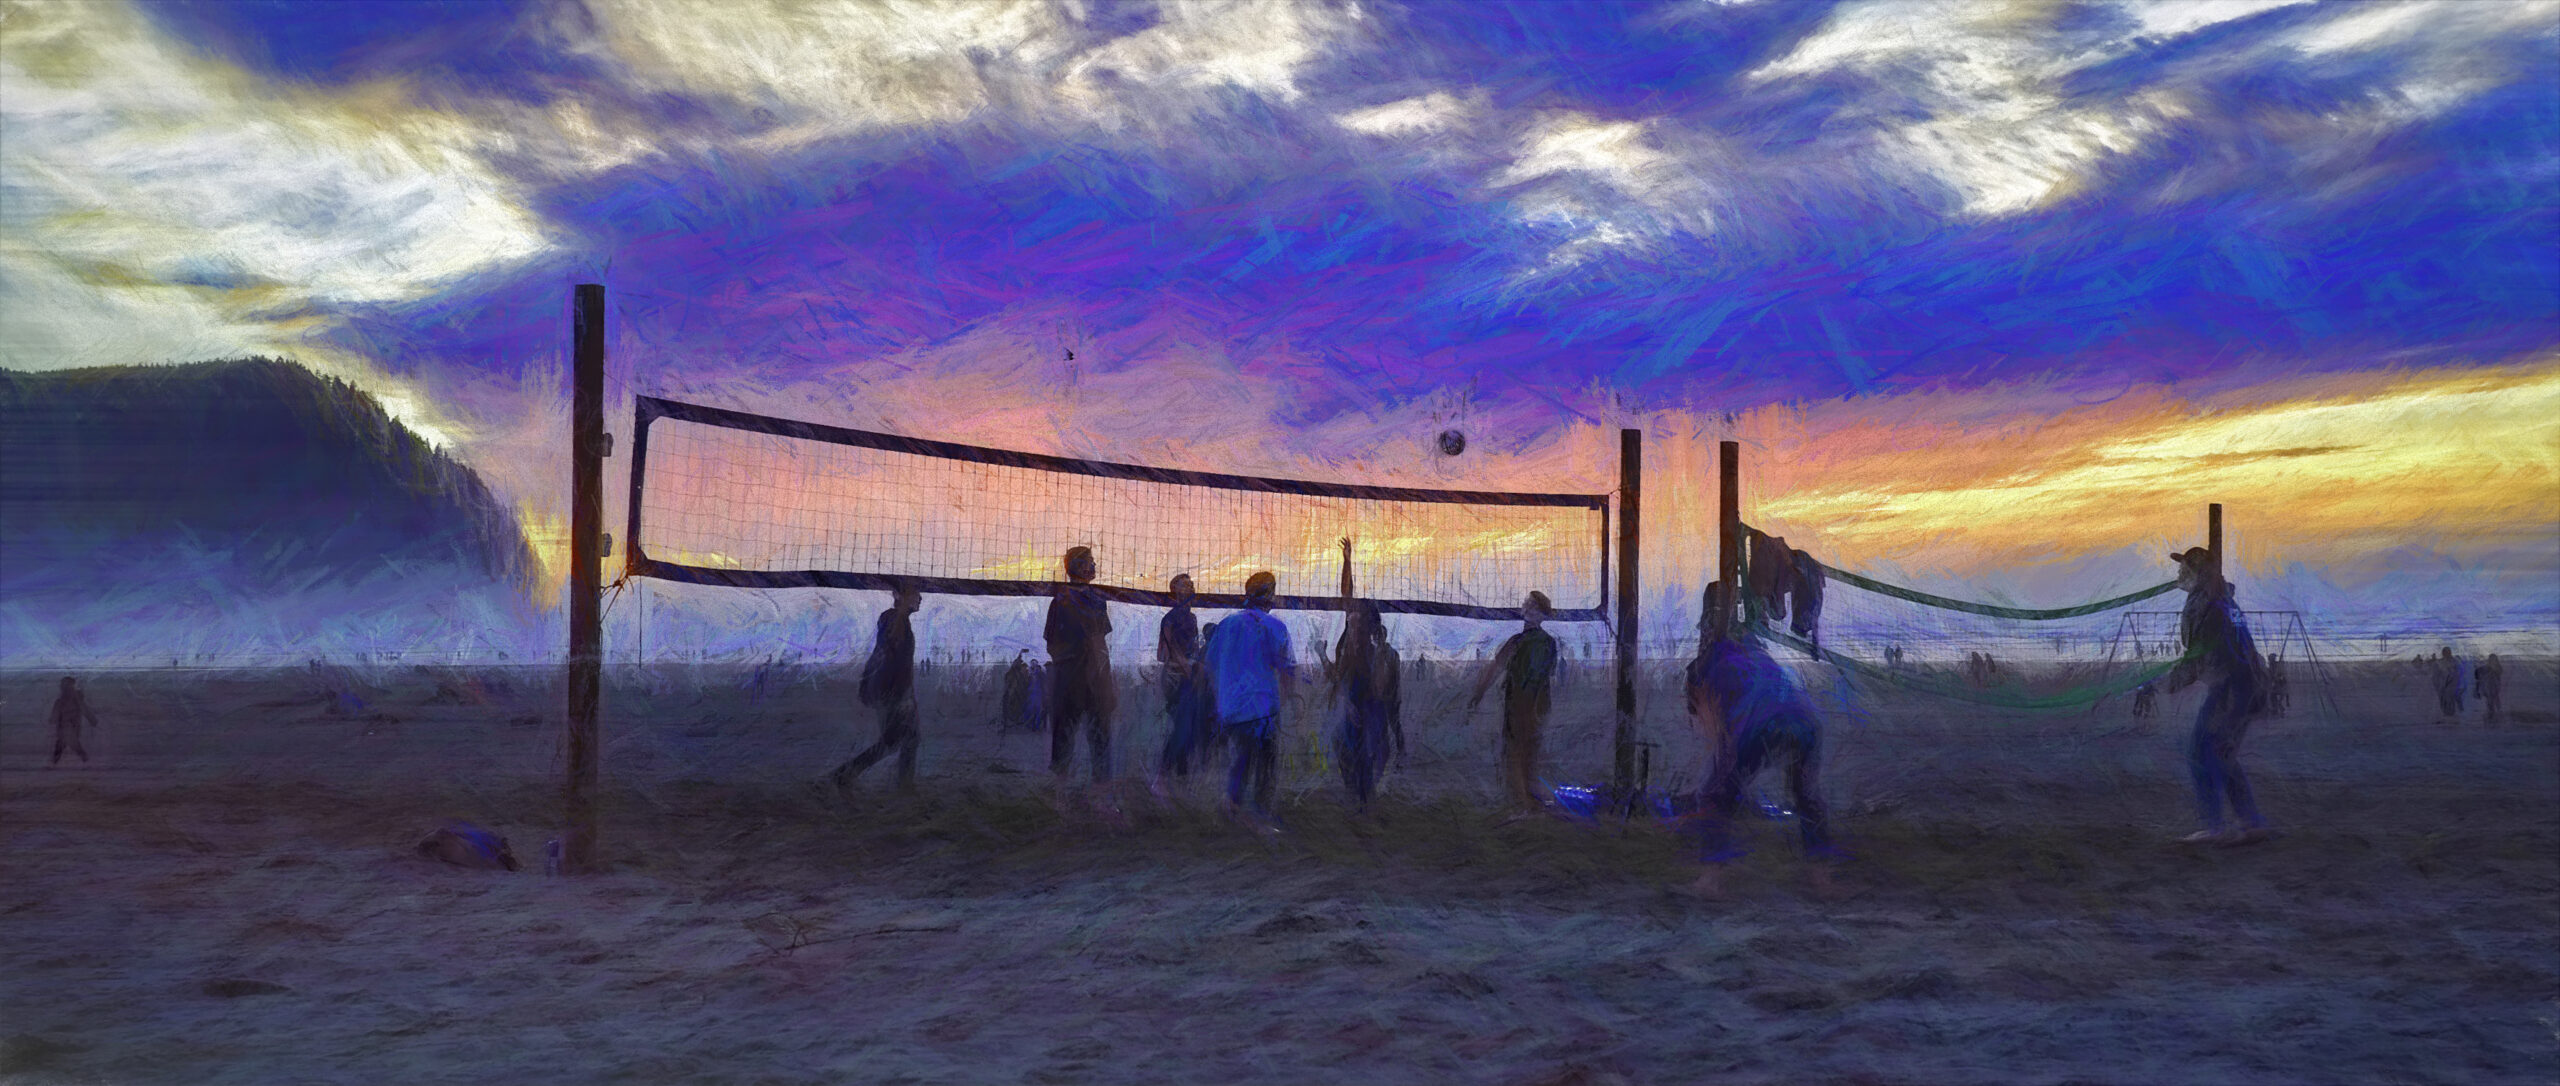 Playing volleyball on the beach at sunset